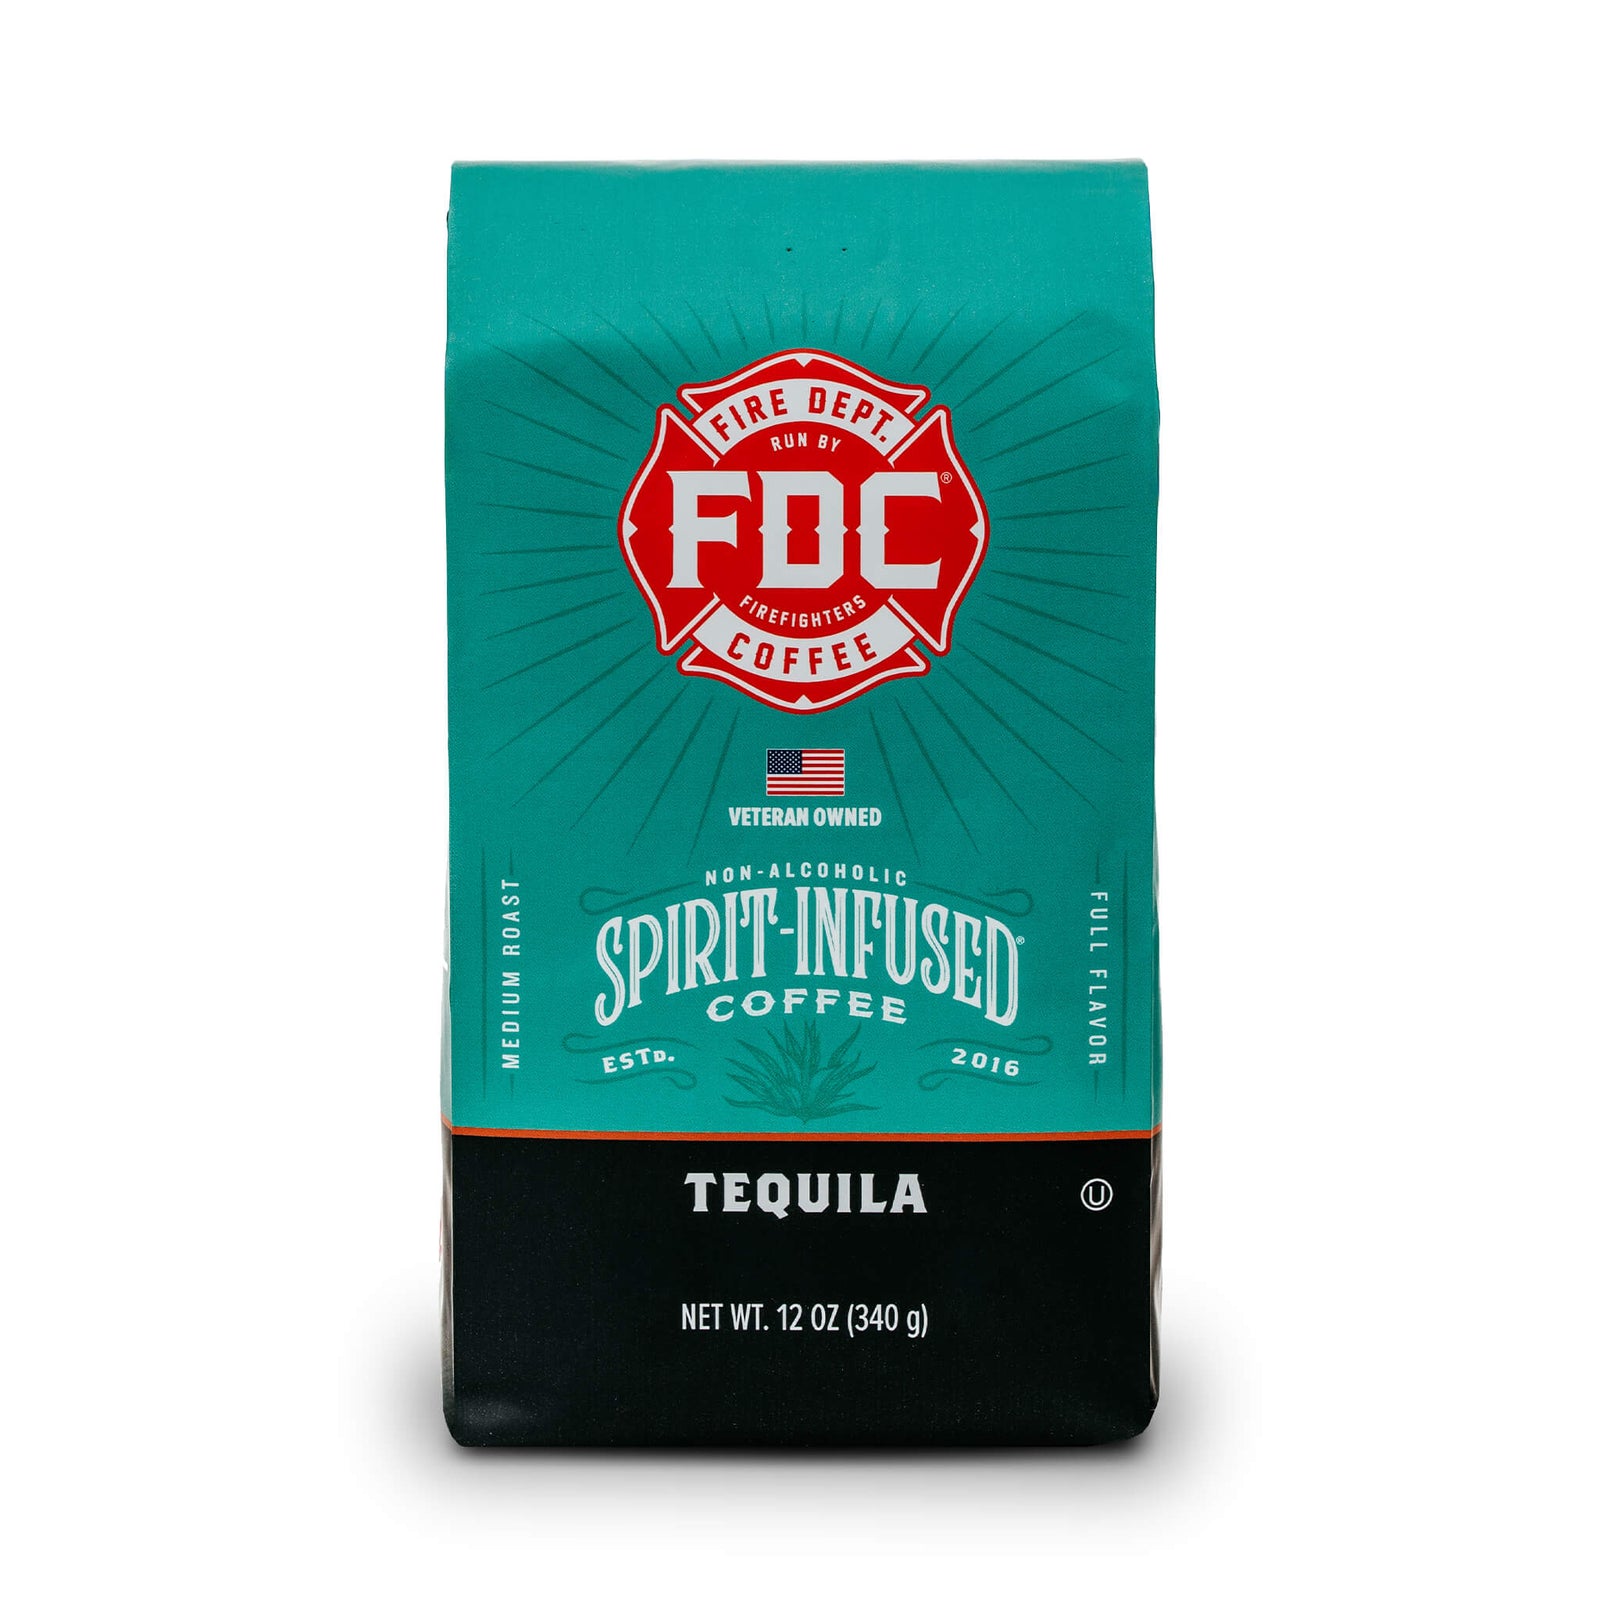 A 12 ounce bag of Tequila Infused Coffee from Fire Department Coffee